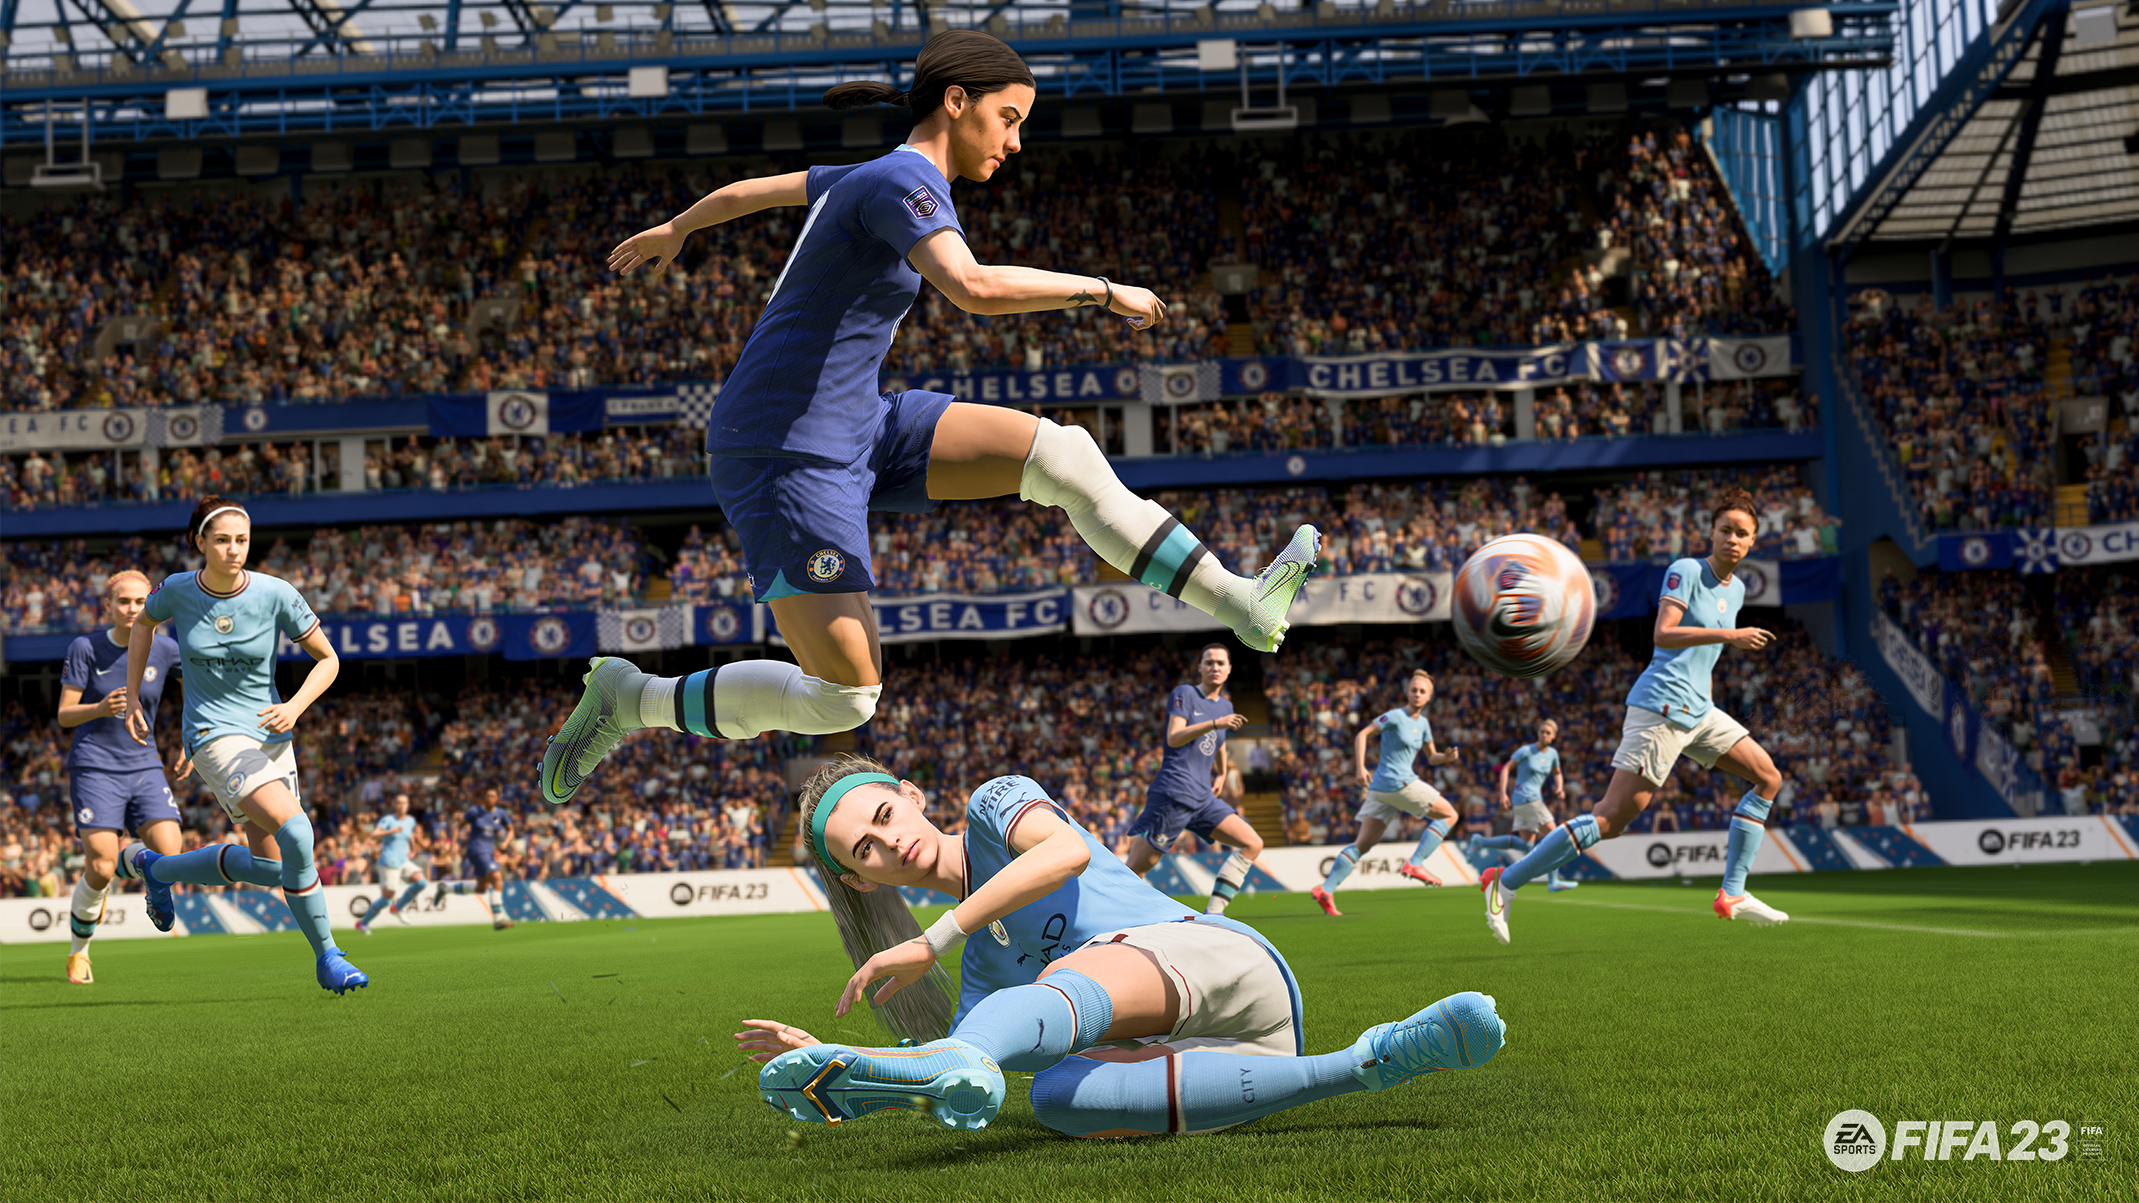 Happy FIFA 23 launch day, especially for PC users from Steam, UE